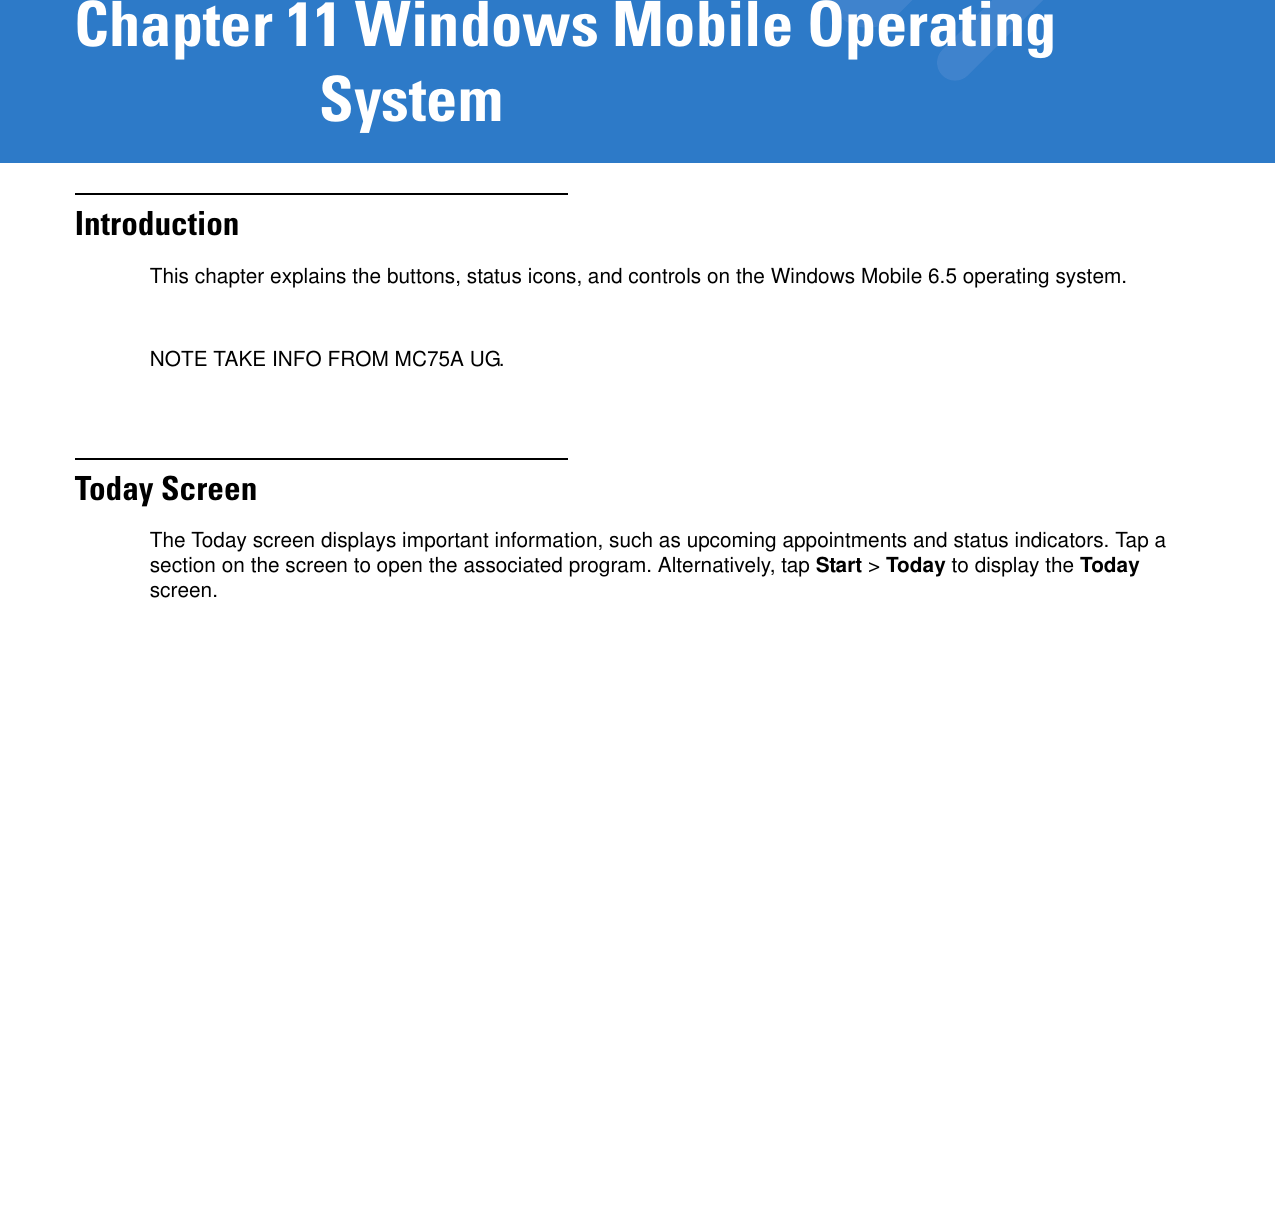 Chapter 11 Windows Mobile Operating SystemIntroductionThis chapter explains the buttons, status icons, and controls on the Windows Mobile 6.5 operating system.NOTE TAKE INFO FROM MC75A UG.Today ScreenThe Today screen displays important information, such as upcoming appointments and status indicators. Tap a section on the screen to open the associated program. Alternatively, tap Start &gt; Today to display the Today screen.